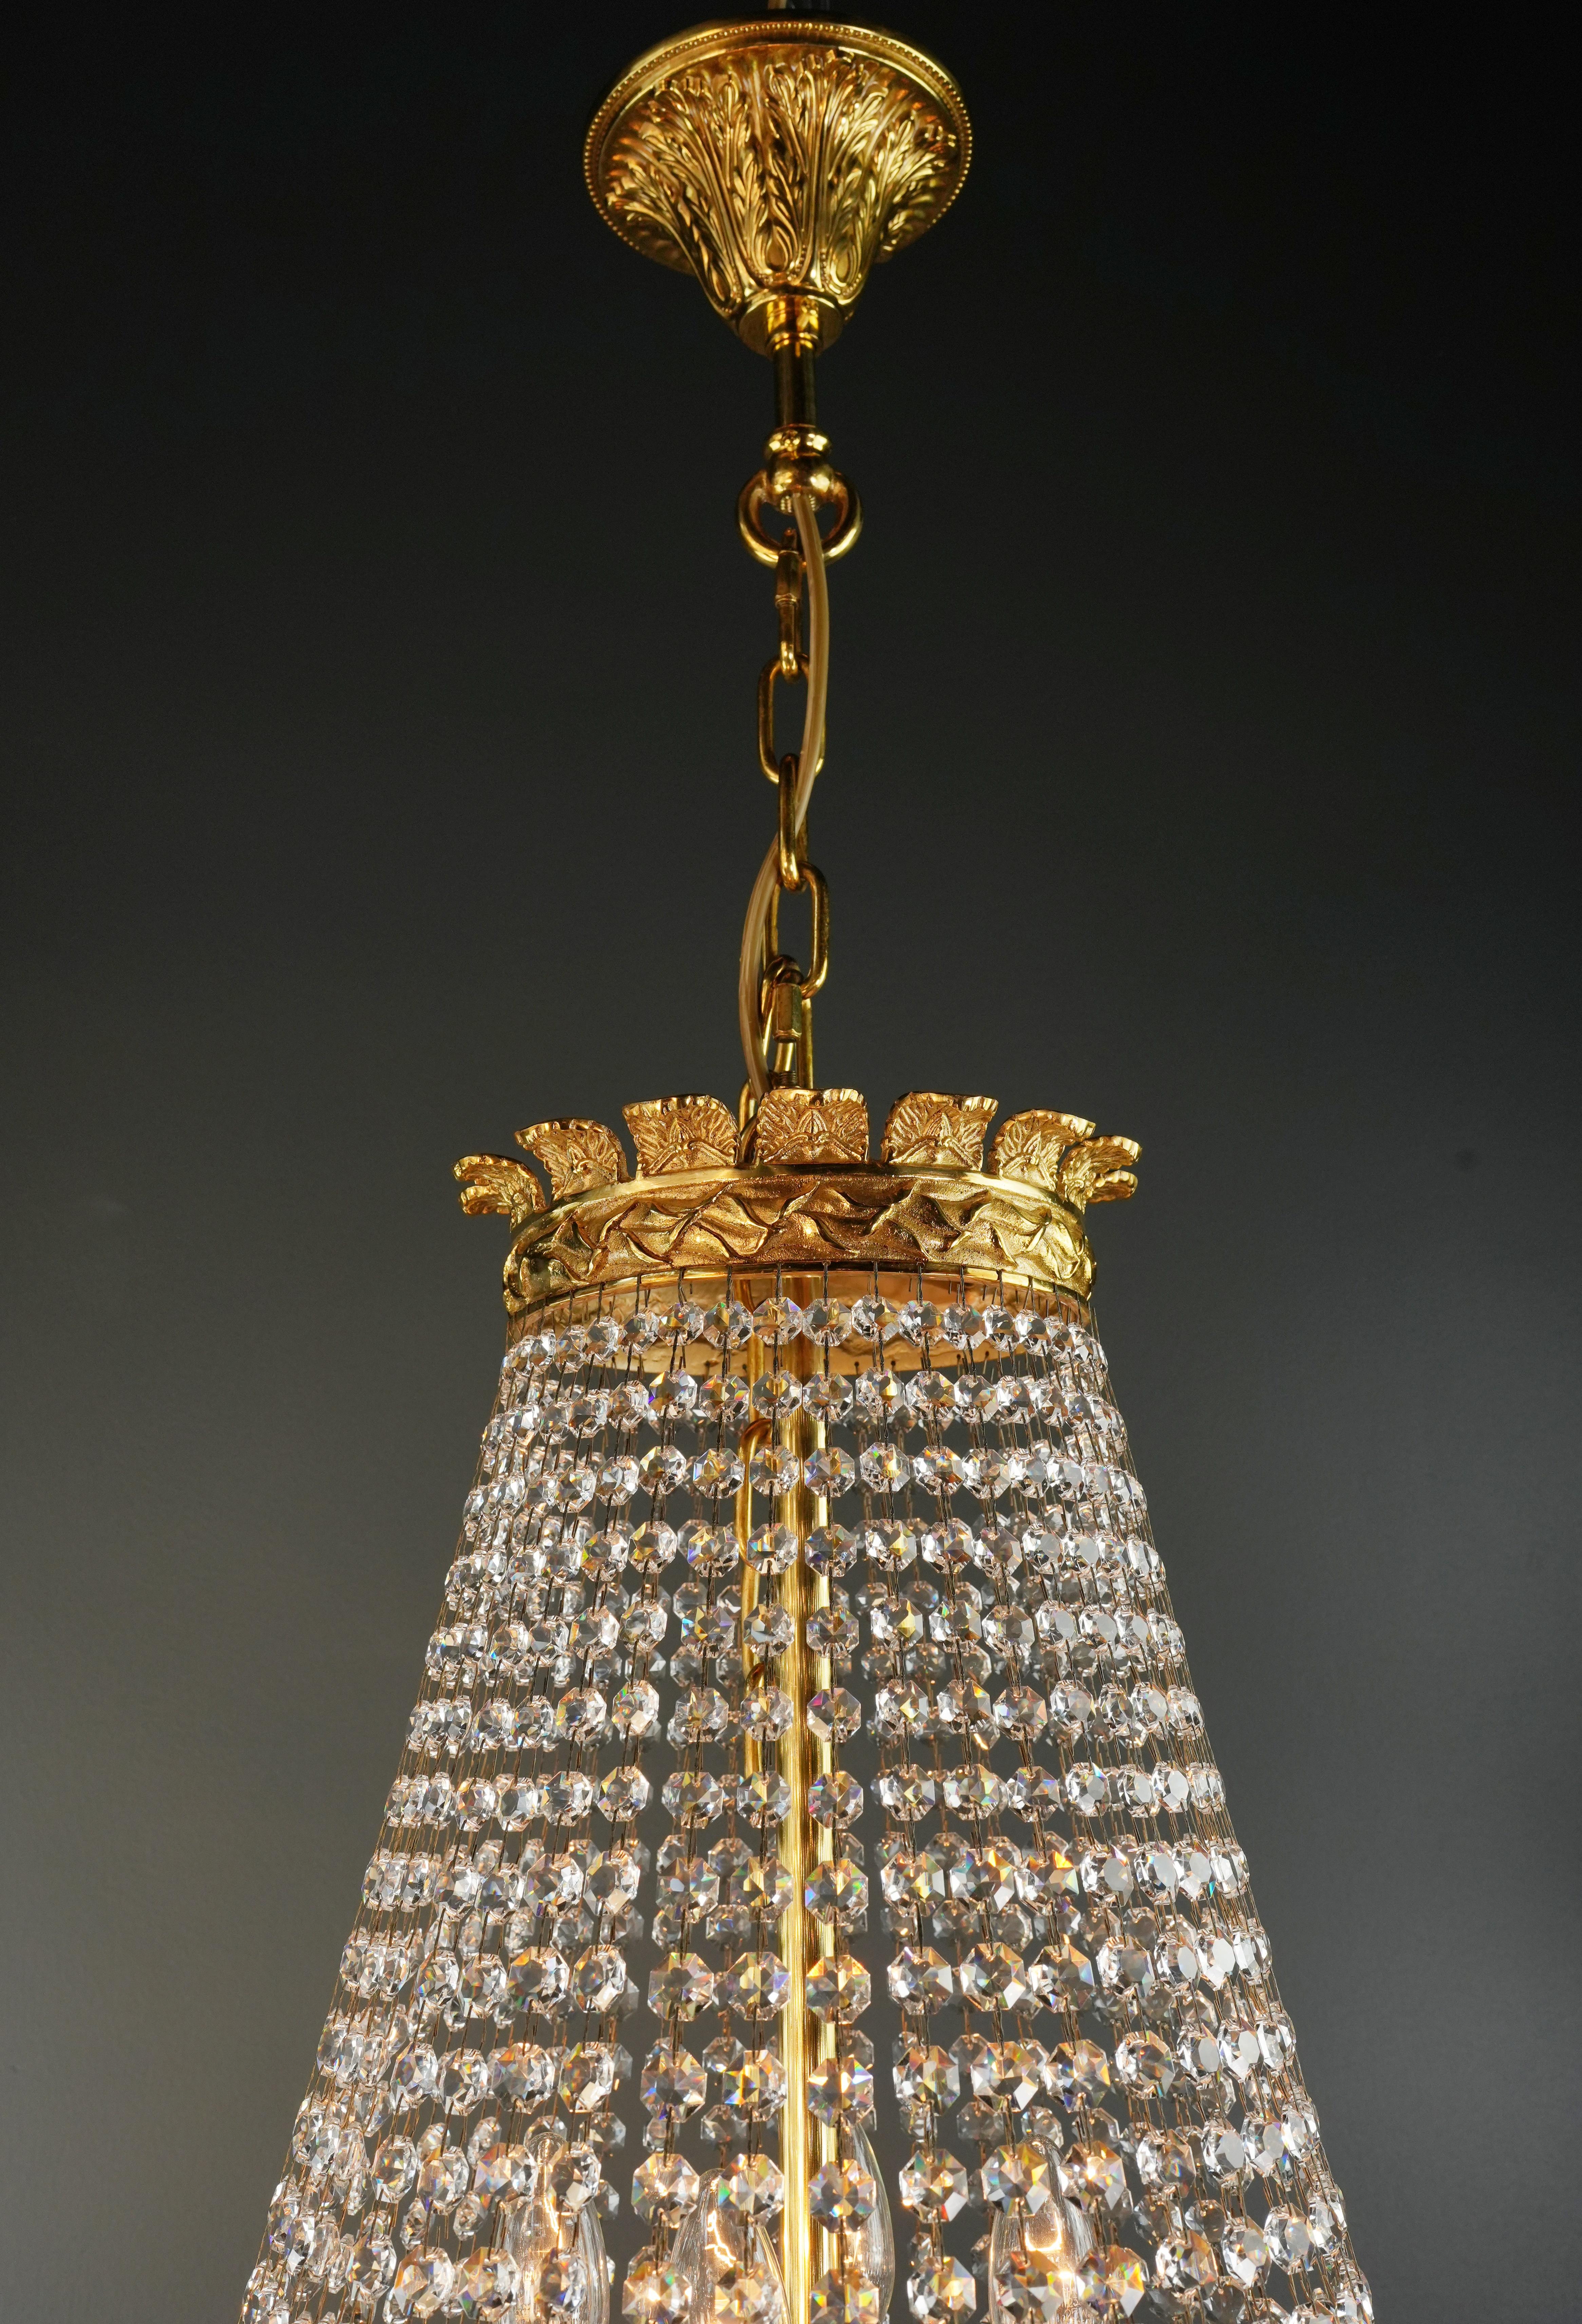 Brass Basket Empire Sac a Pearl Chandelier Crystal Lustre Lamp Antique Gold For Sale 9